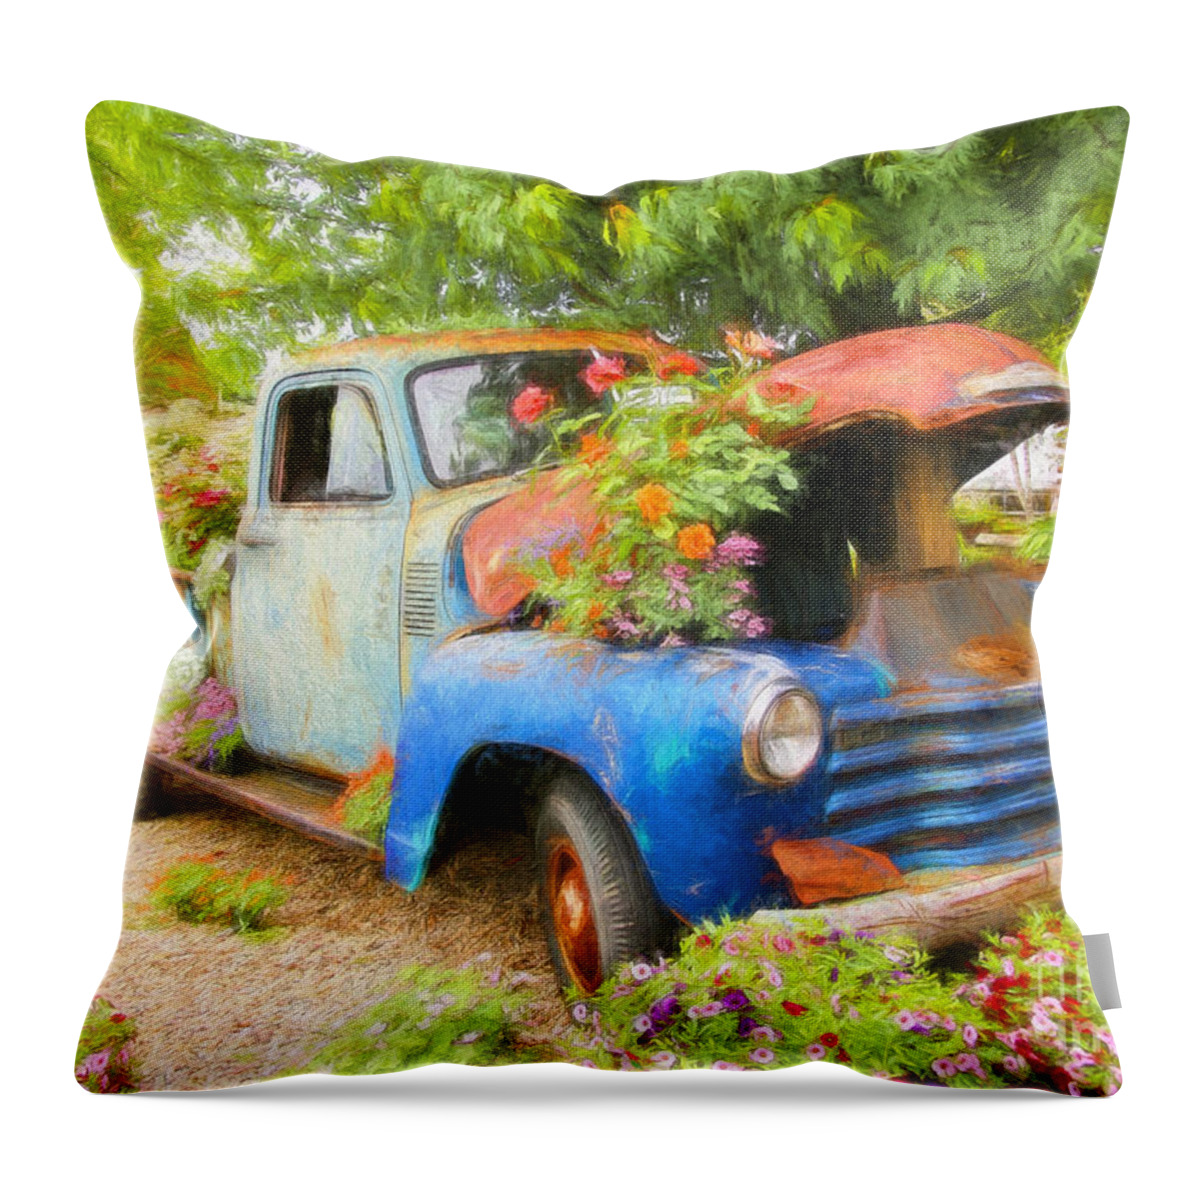 Flowers In Truck Throw Pillow featuring the photograph Truckful of Flowers by Clare VanderVeen